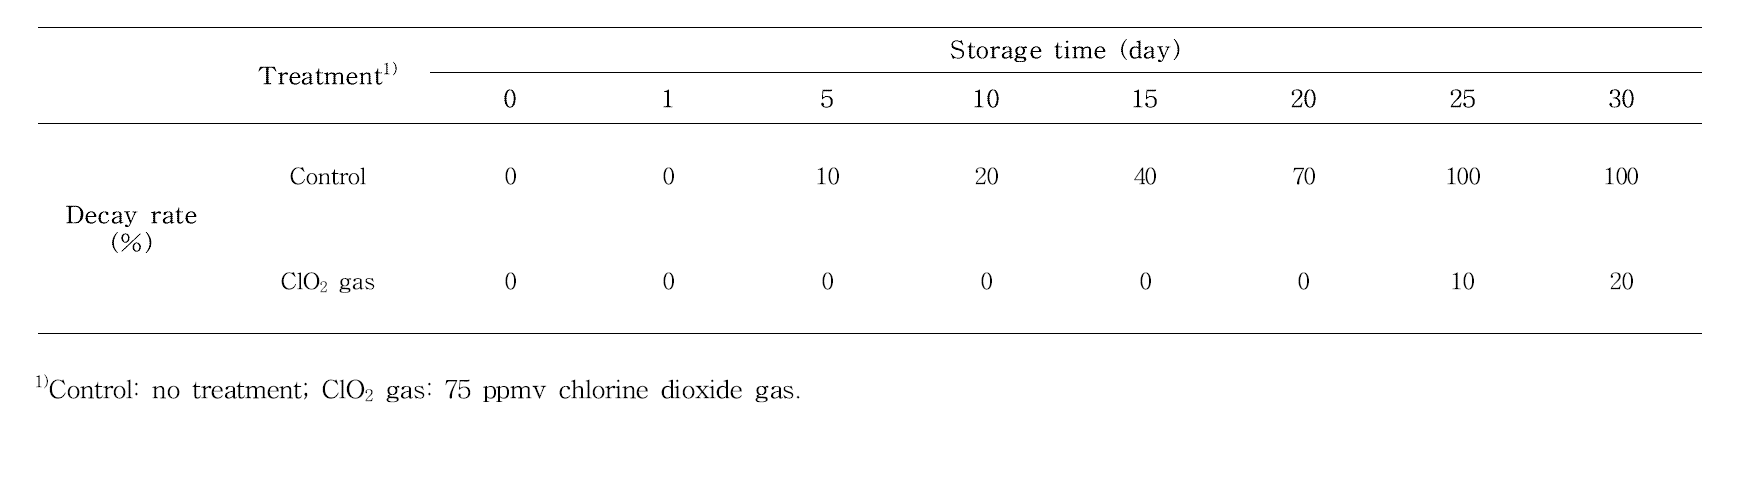 Decay rate of paprika during storage at 8°C, RH 90%